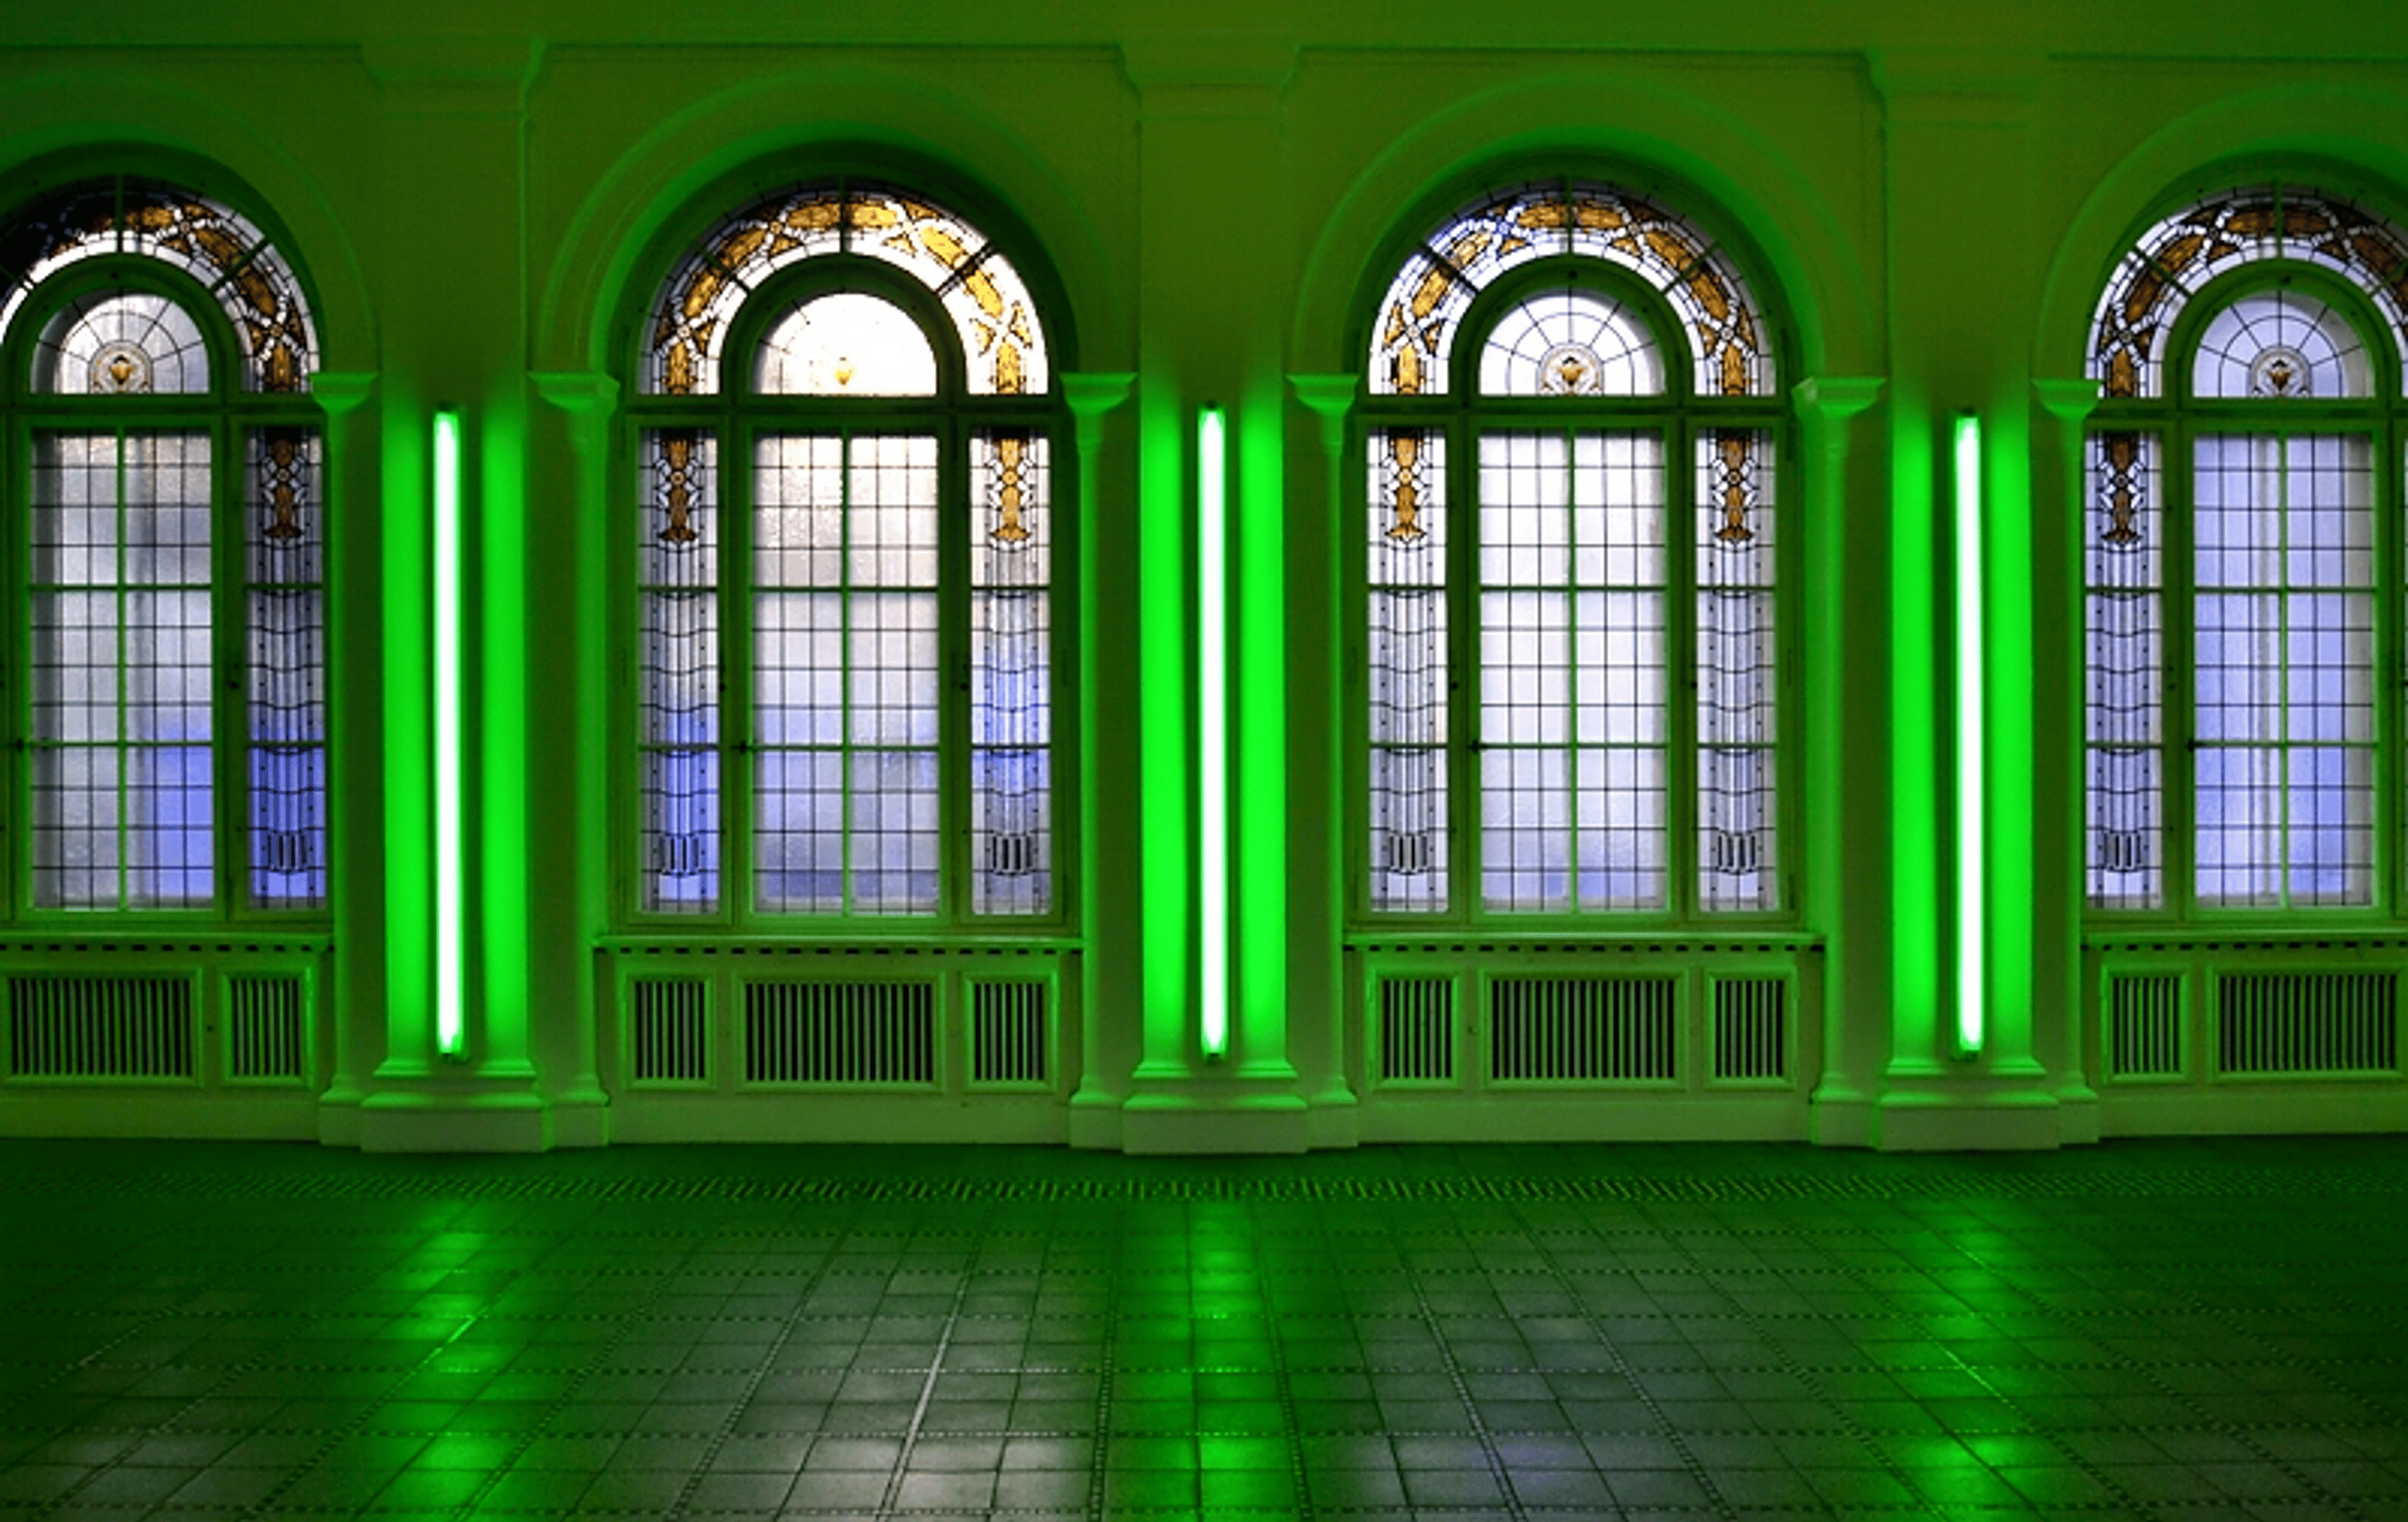 The lights are green neon lights mounted vertically on the wall between the patterned windows.